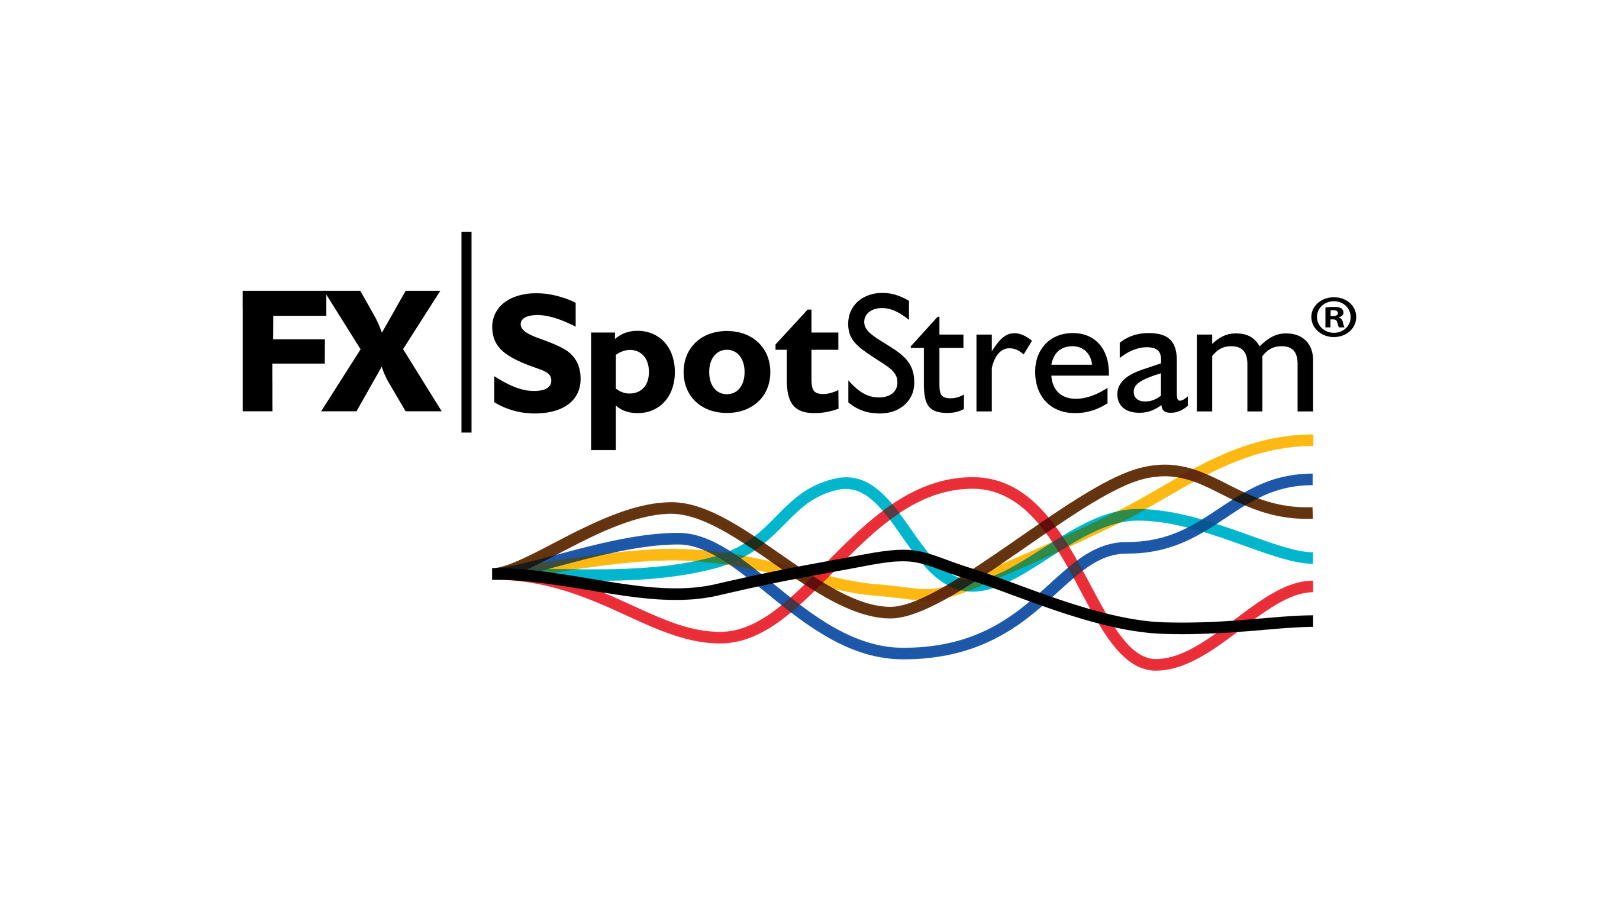 FXSpotStream Report May Volume Figures - ADV up 23.36% YoY 